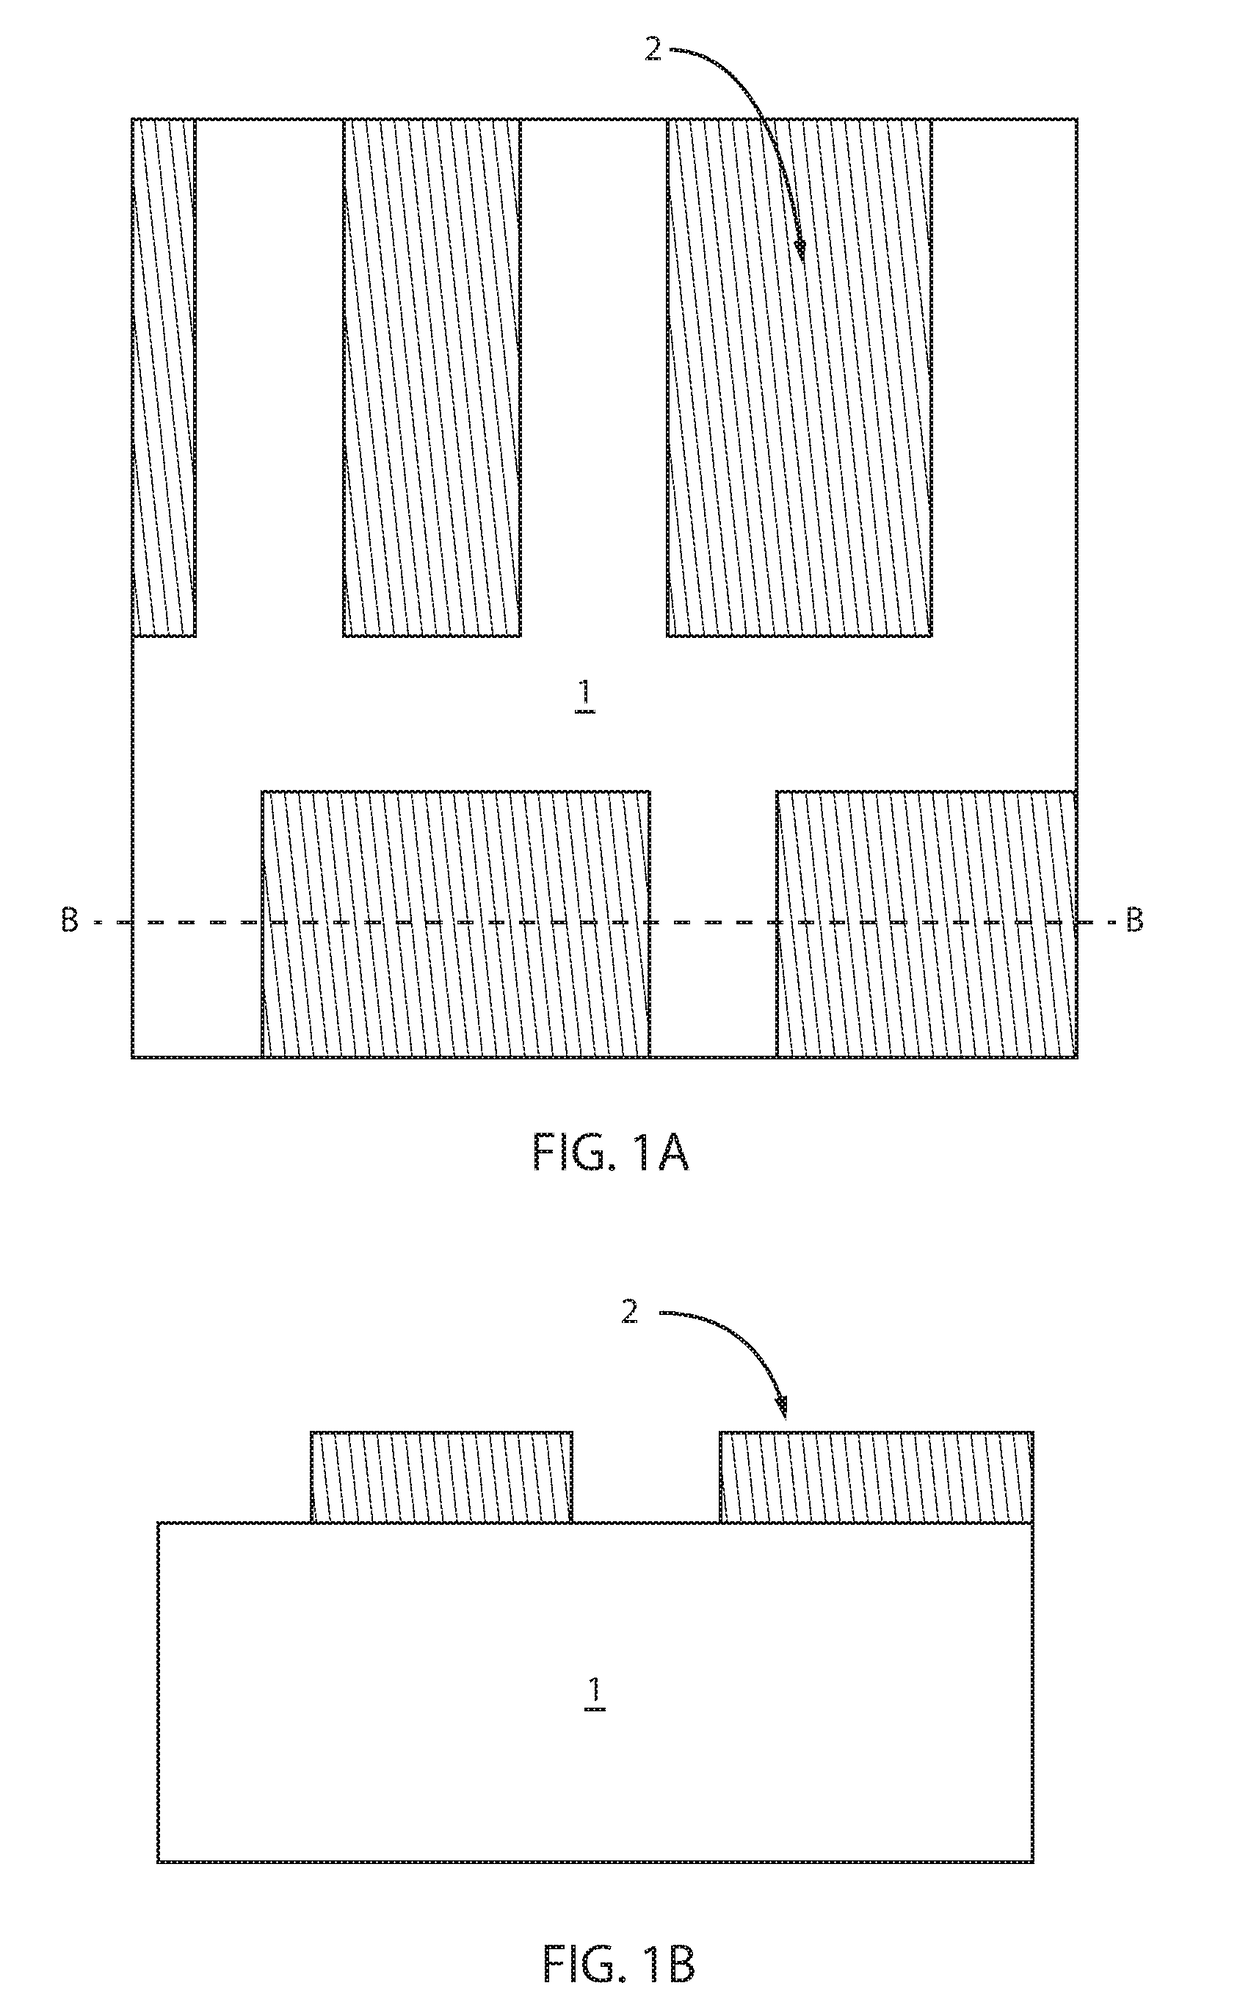 Epitaxial oxide fin segments to prevent strained semiconductor fin end relaxation